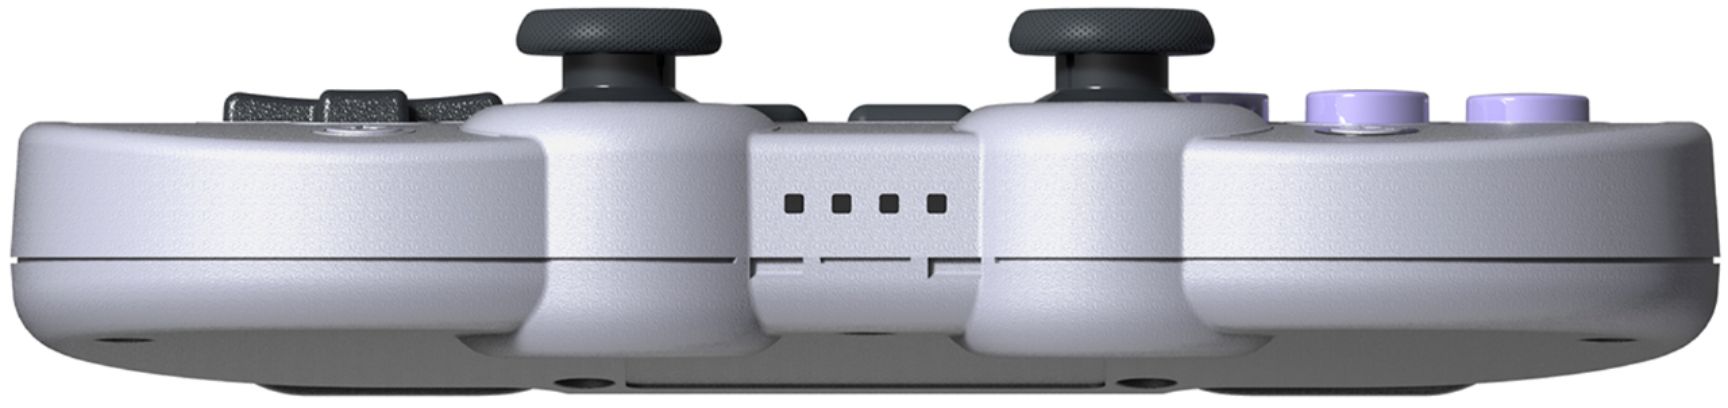 Left View: 8BitDo - SN30 Pro Wireless Controller for PC, Mac, Android, and Nintendo Switch - Gray